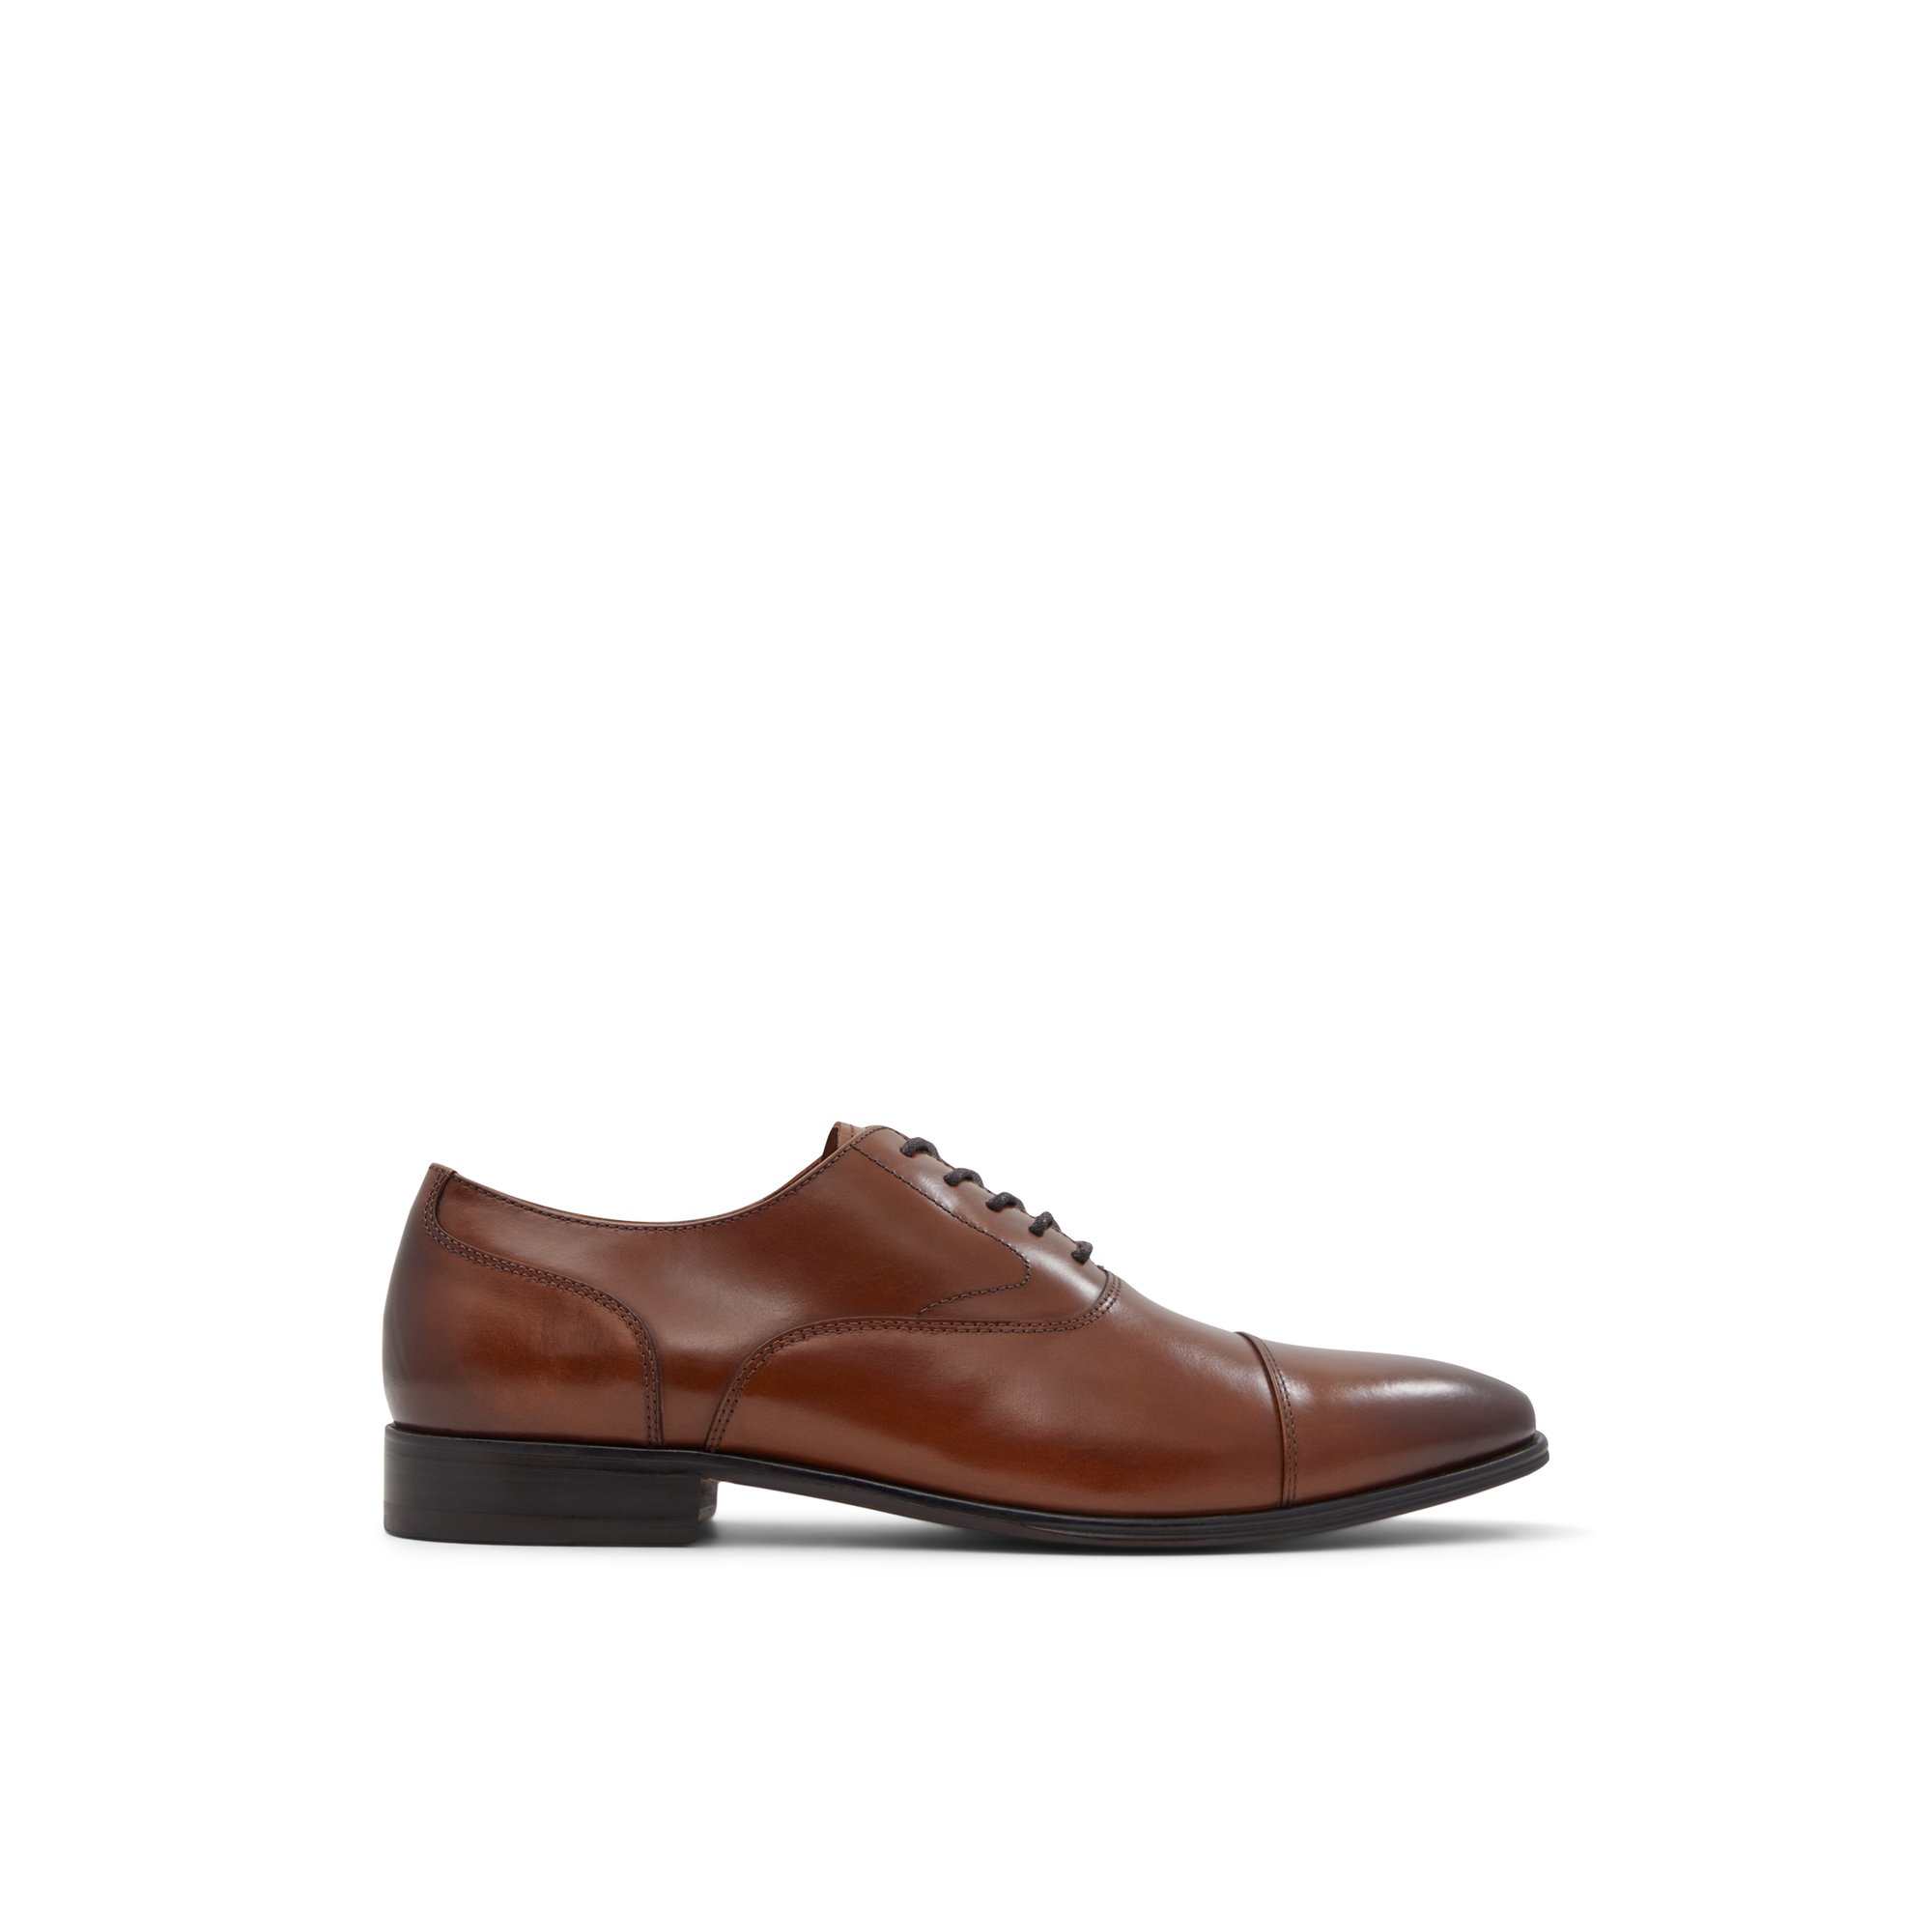 ALDO Gregoryy - Men's Oxfords and Lace Ups - Brown